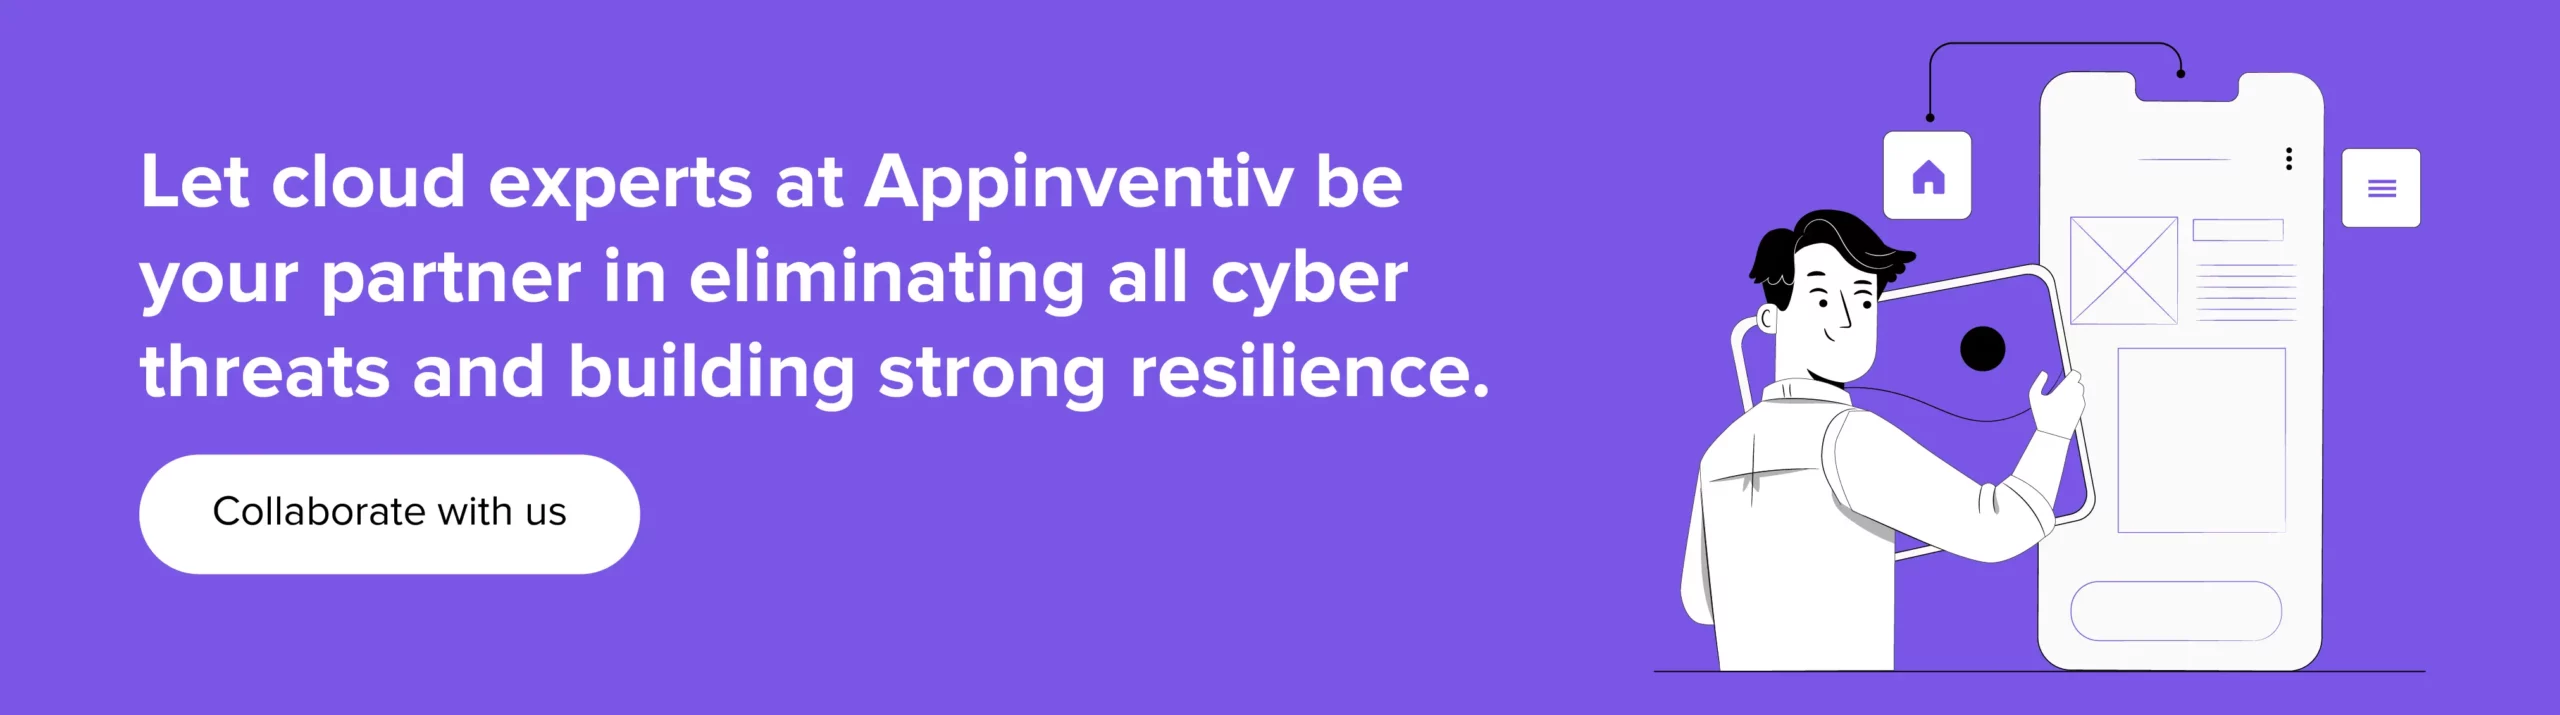 Build a strong resilience with our cloud experts